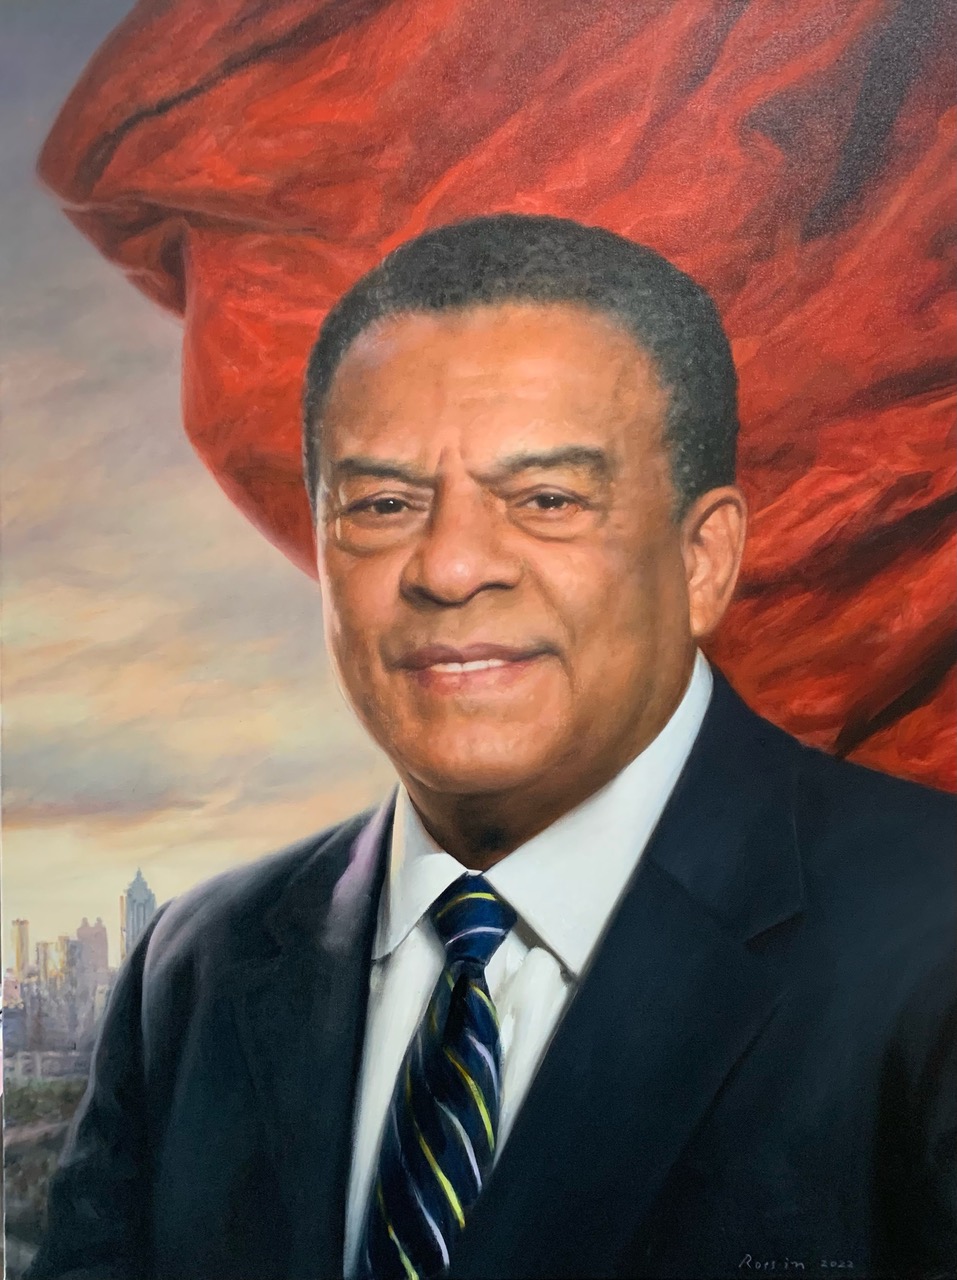 Ross Rossin Portrait Artist in Atlanta's Oil Painting of Ambassador Andrew Young - Portraiture, USA